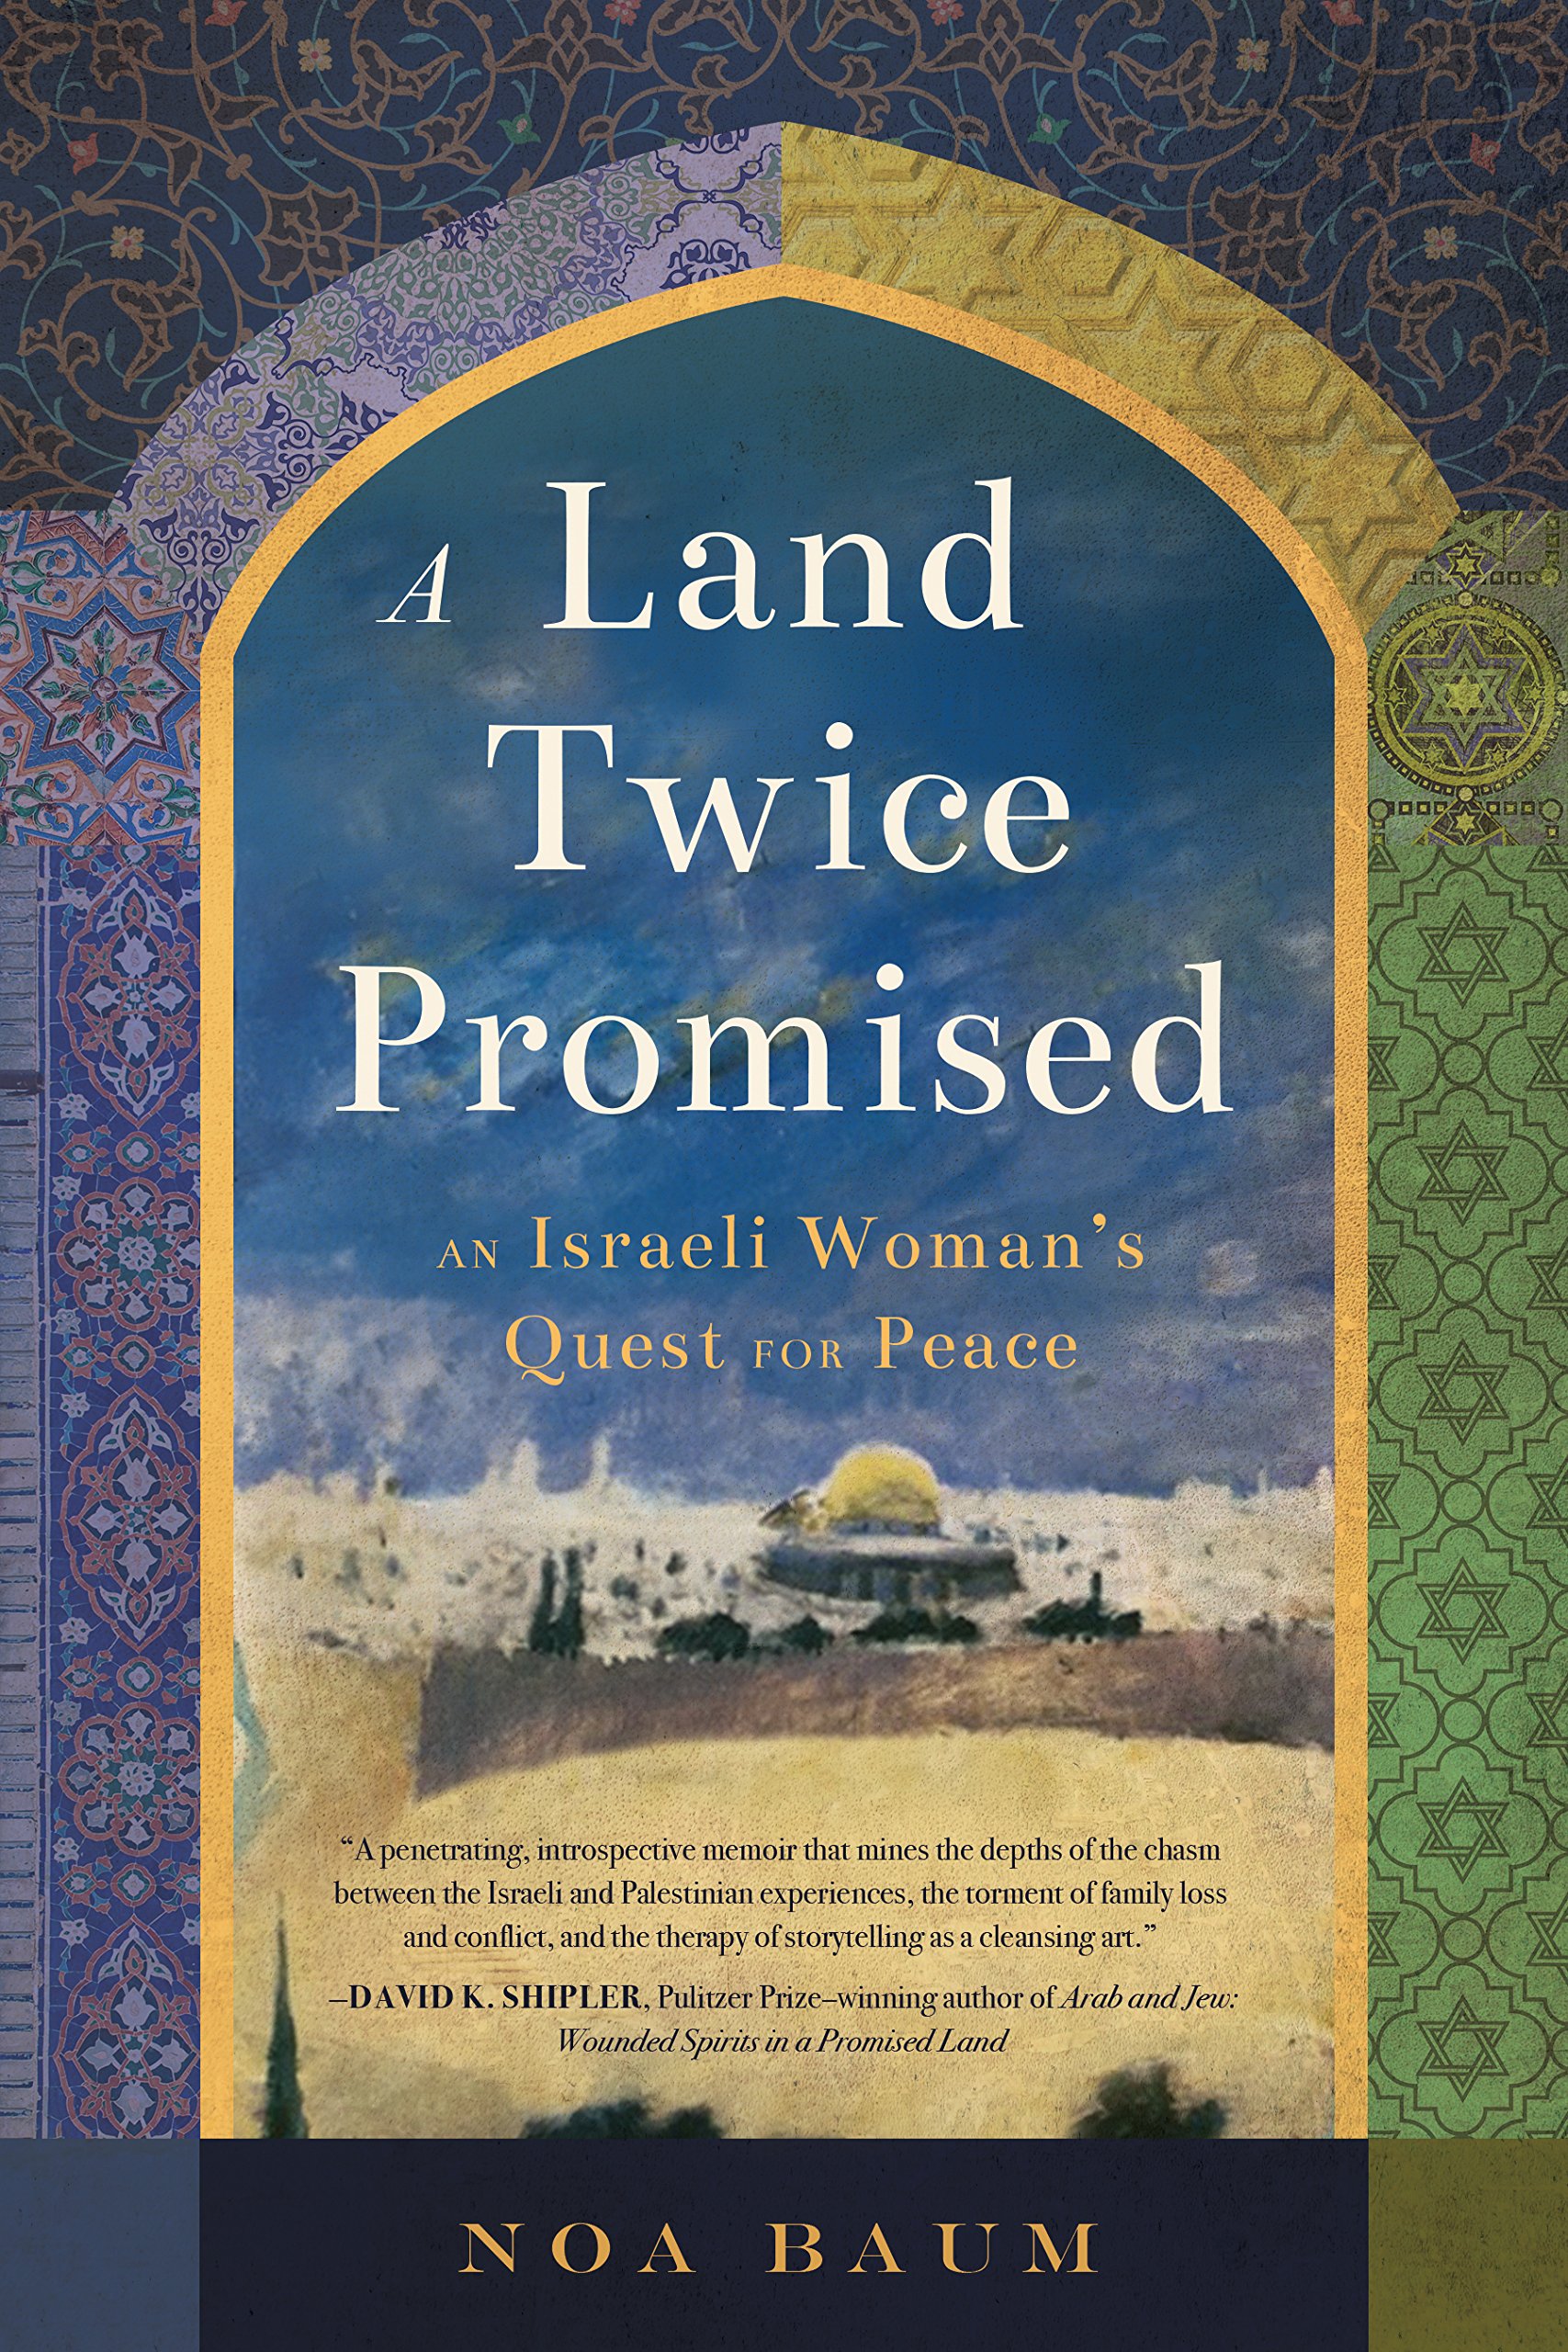 A Land Twice Promised: An Israeli Woman's Quest for Peace